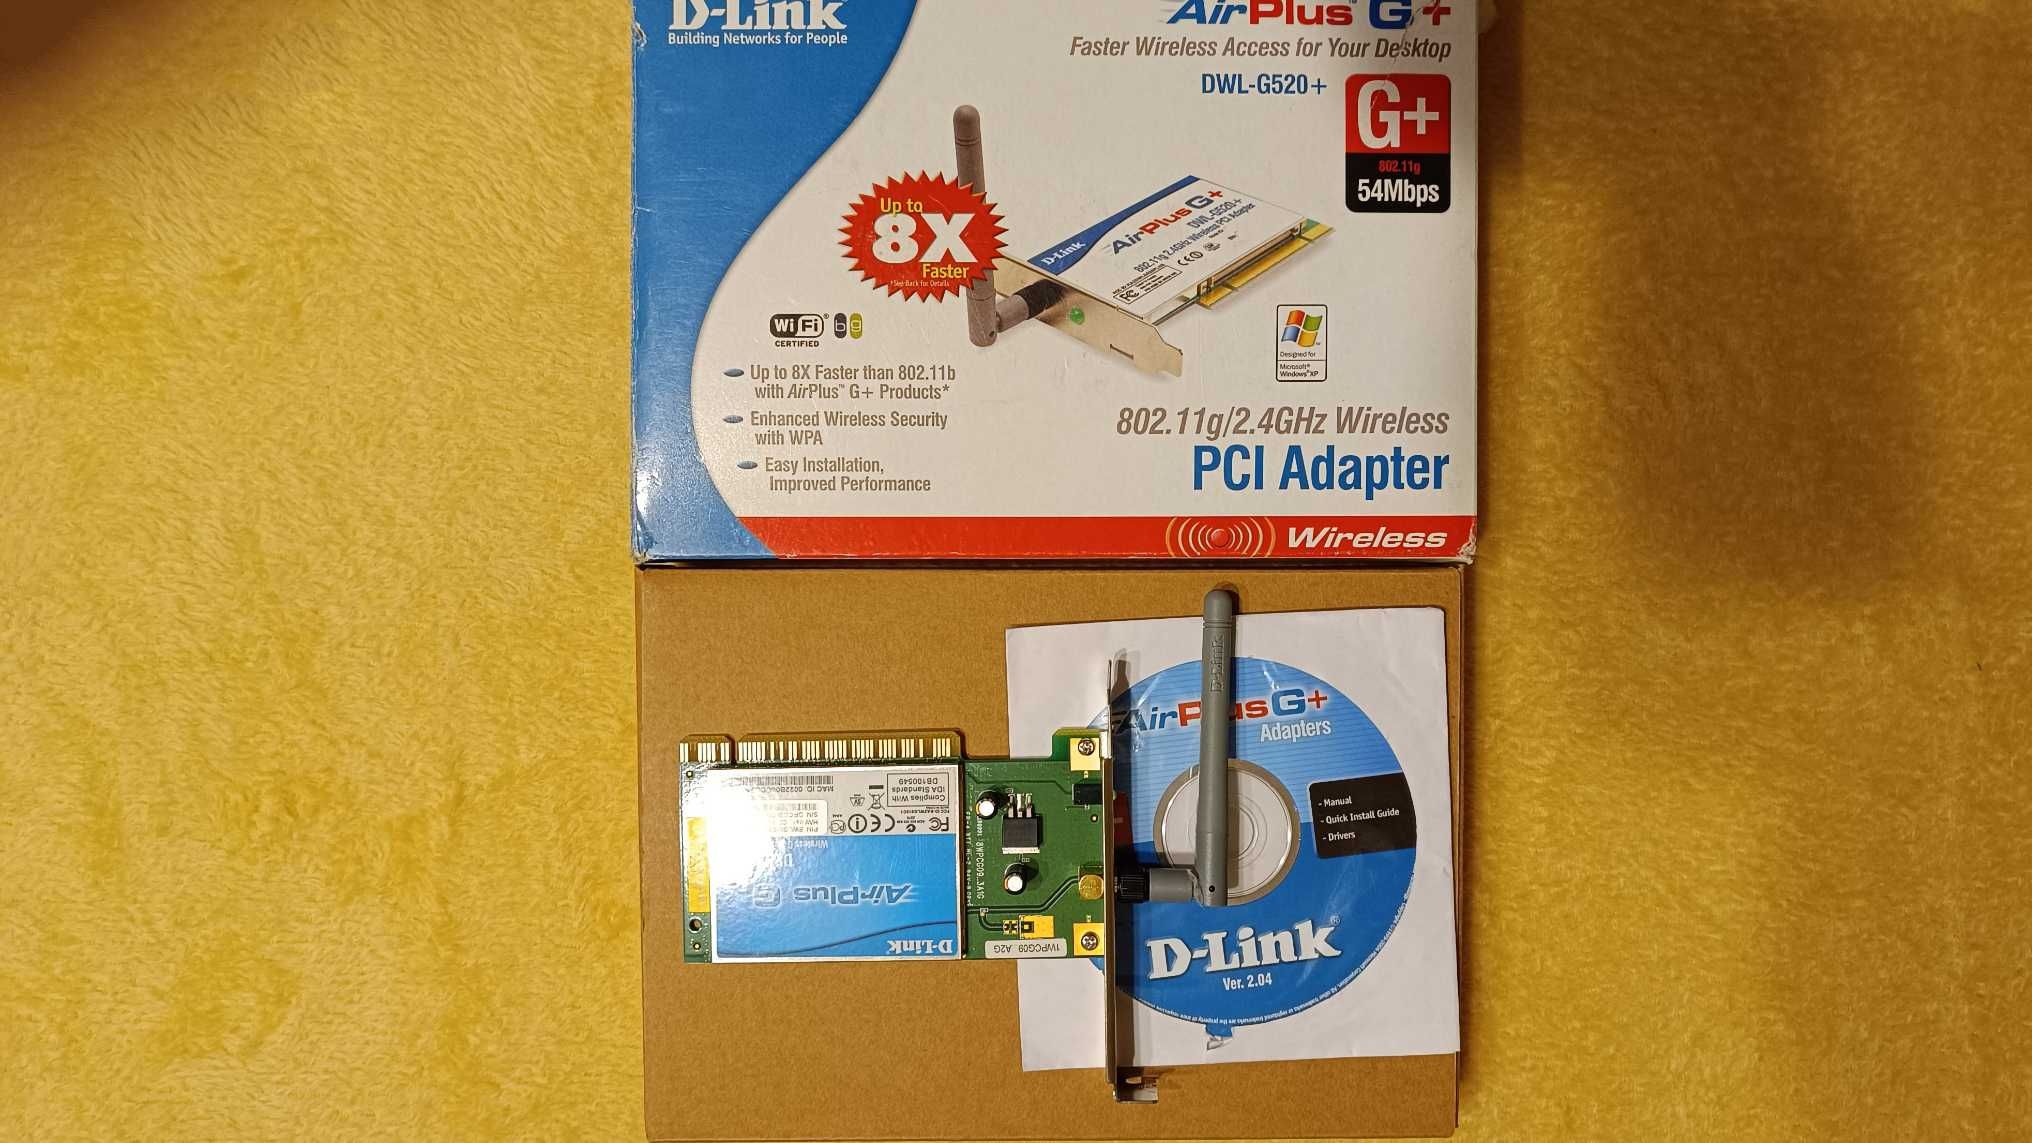 D-Link Air Plus G+ PCI Adapter